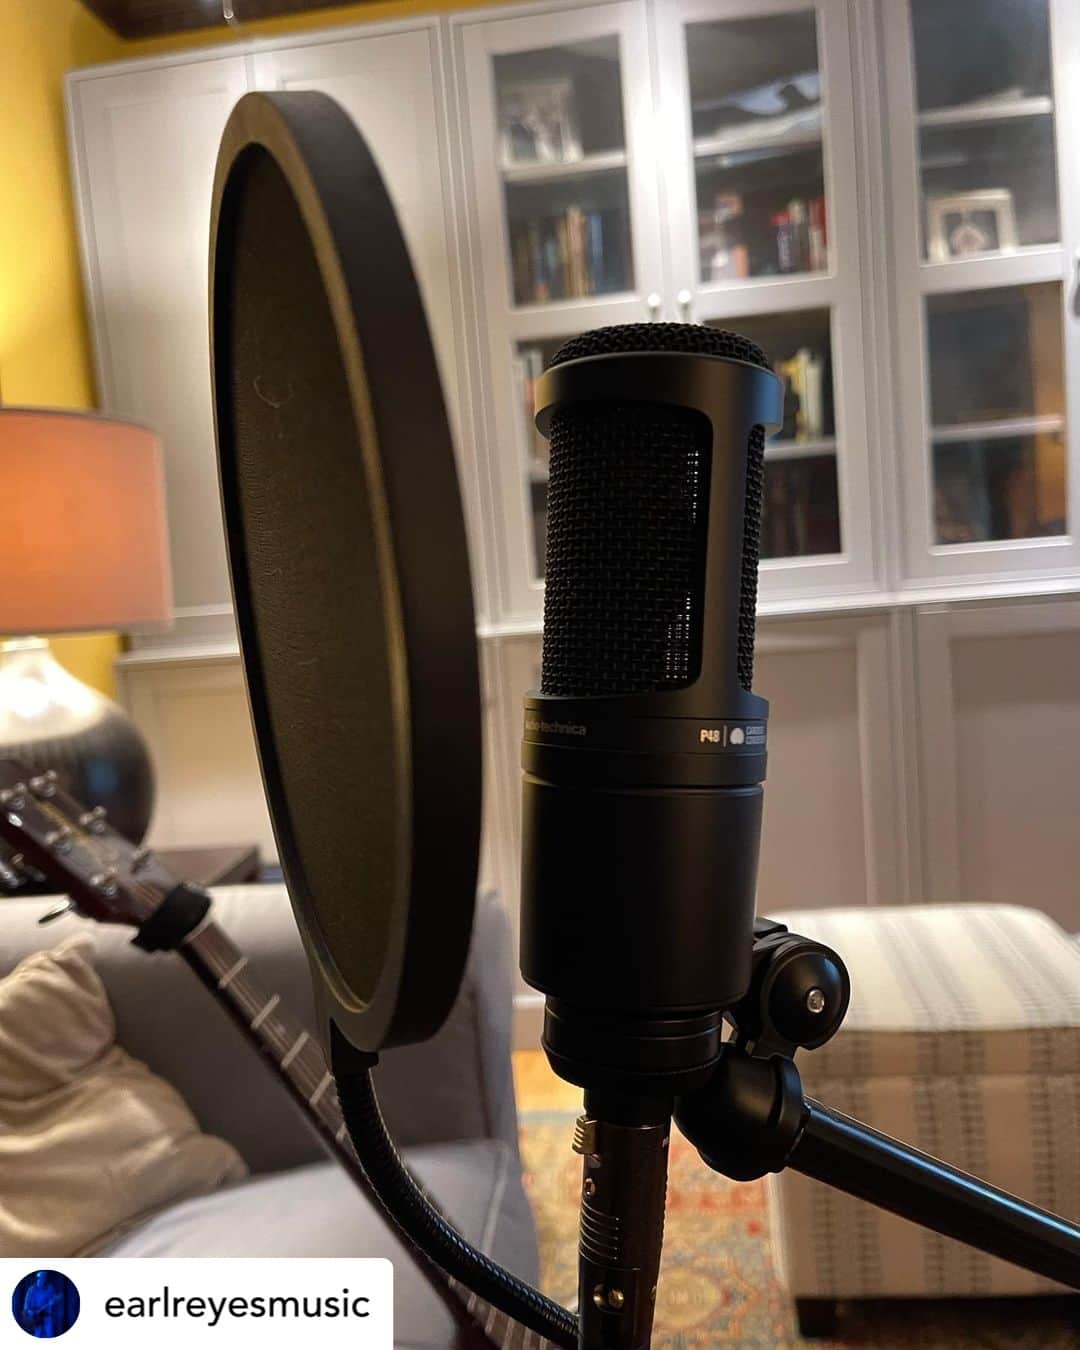 Audio-Technica USAのインスタグラム：「#FanPhotoFriday: Looking for a reliable microphone for your content creation needs? The AT2020 delivers unmatched and reliable sound quality. Thanks for sharing our microphone, @earlreyesmusic!⁠ .⁠ .⁠ .⁠ #AudioTechnica #Microphone #AT2020 #ContentCreation #Recording」